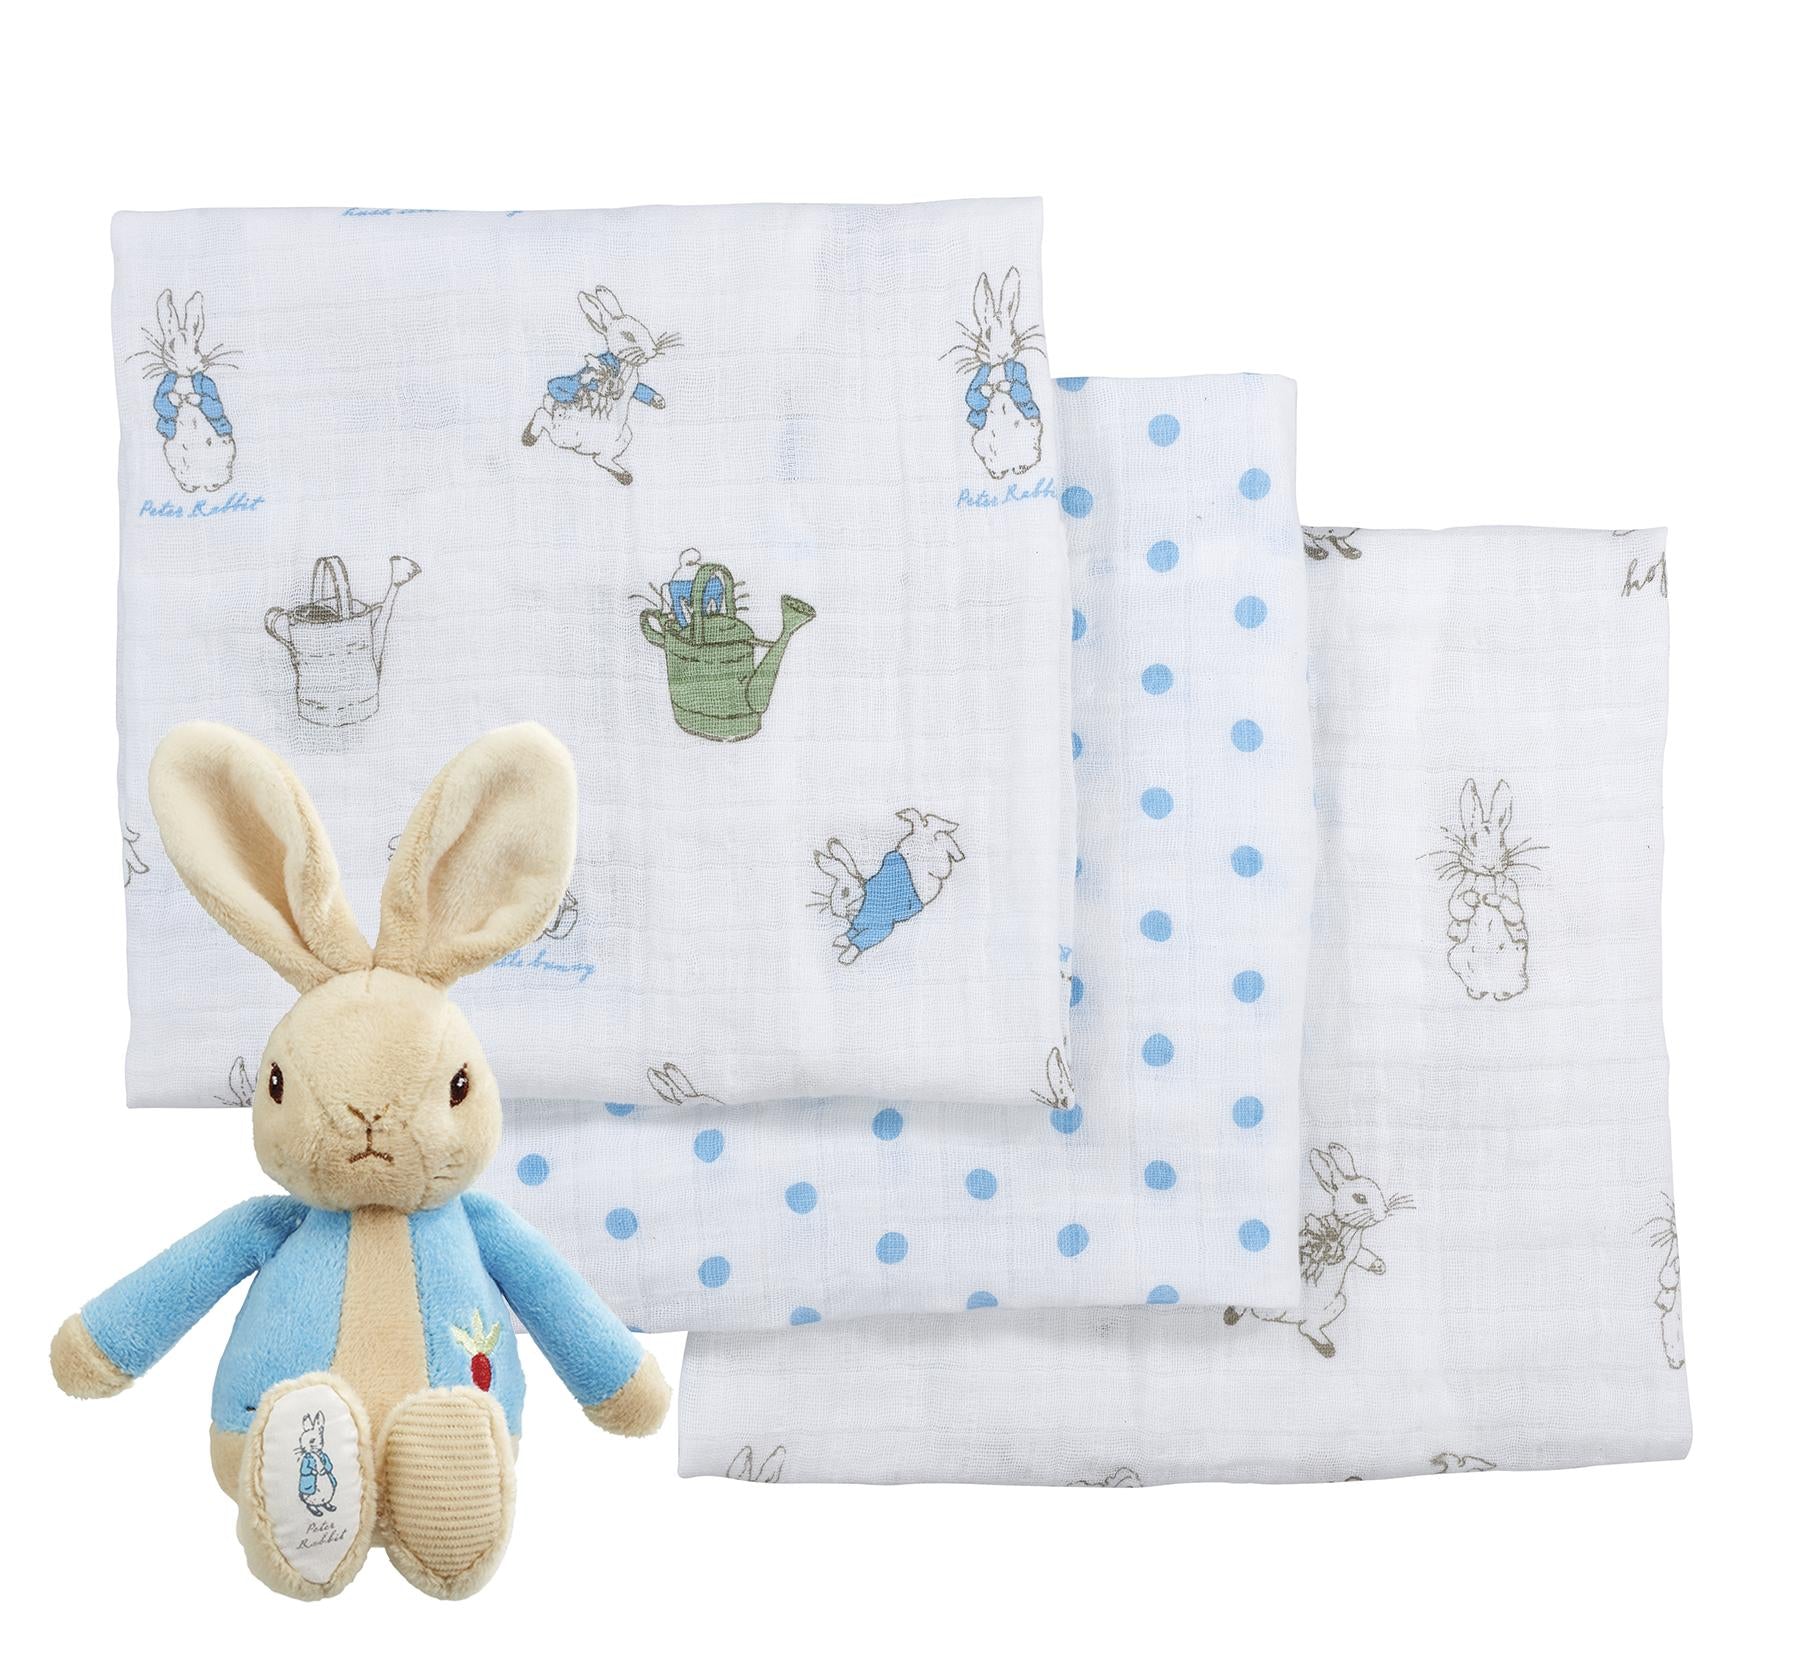 3 white muslin squares with Peter Rabbit-themed patterns and a Peter Rabbit soft toy